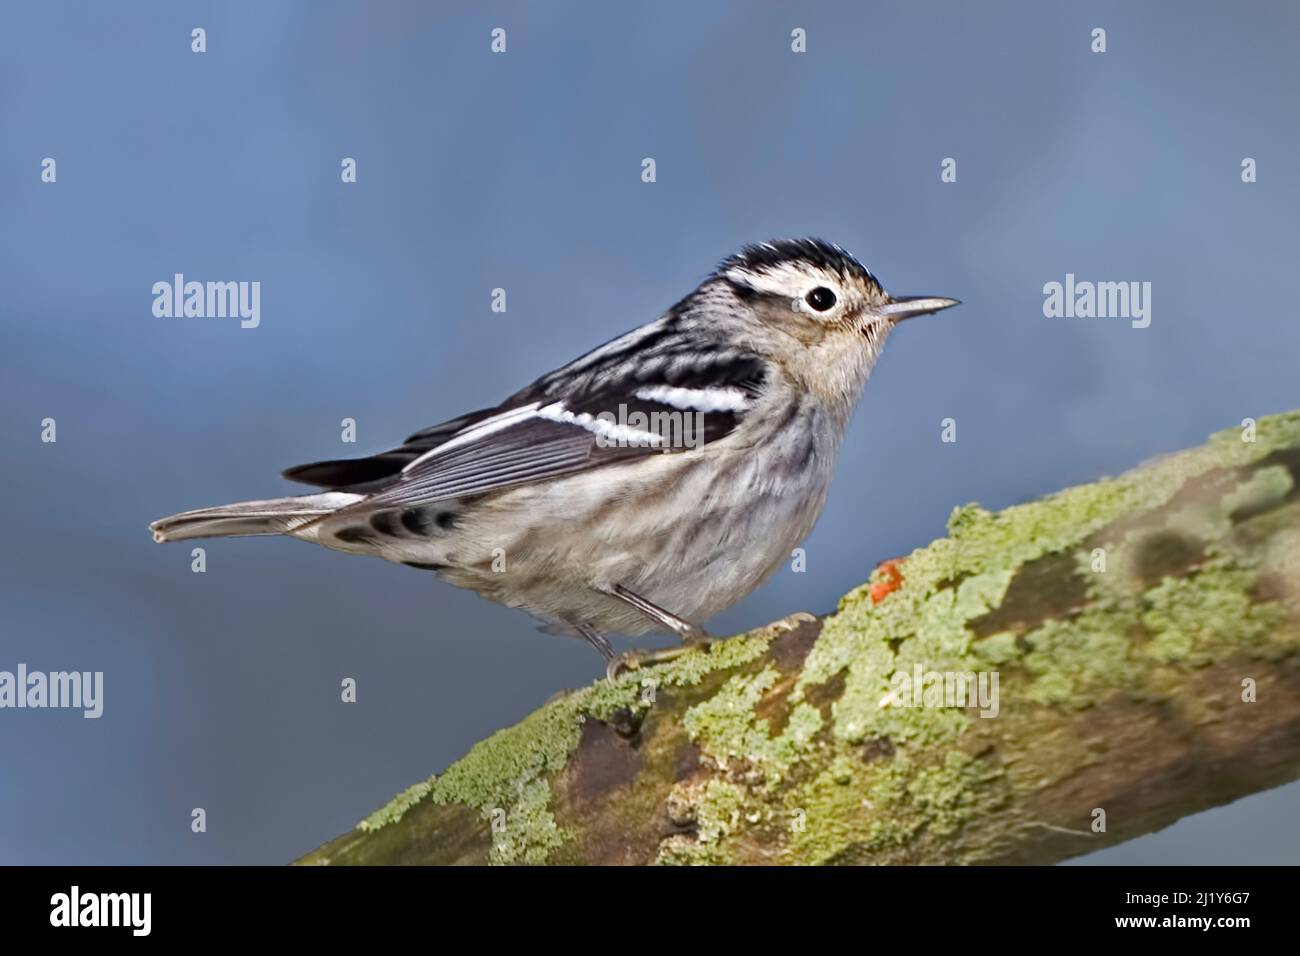 A Female Black-and-white  Warbler, Mniotilta varia, close up view Stock Photo